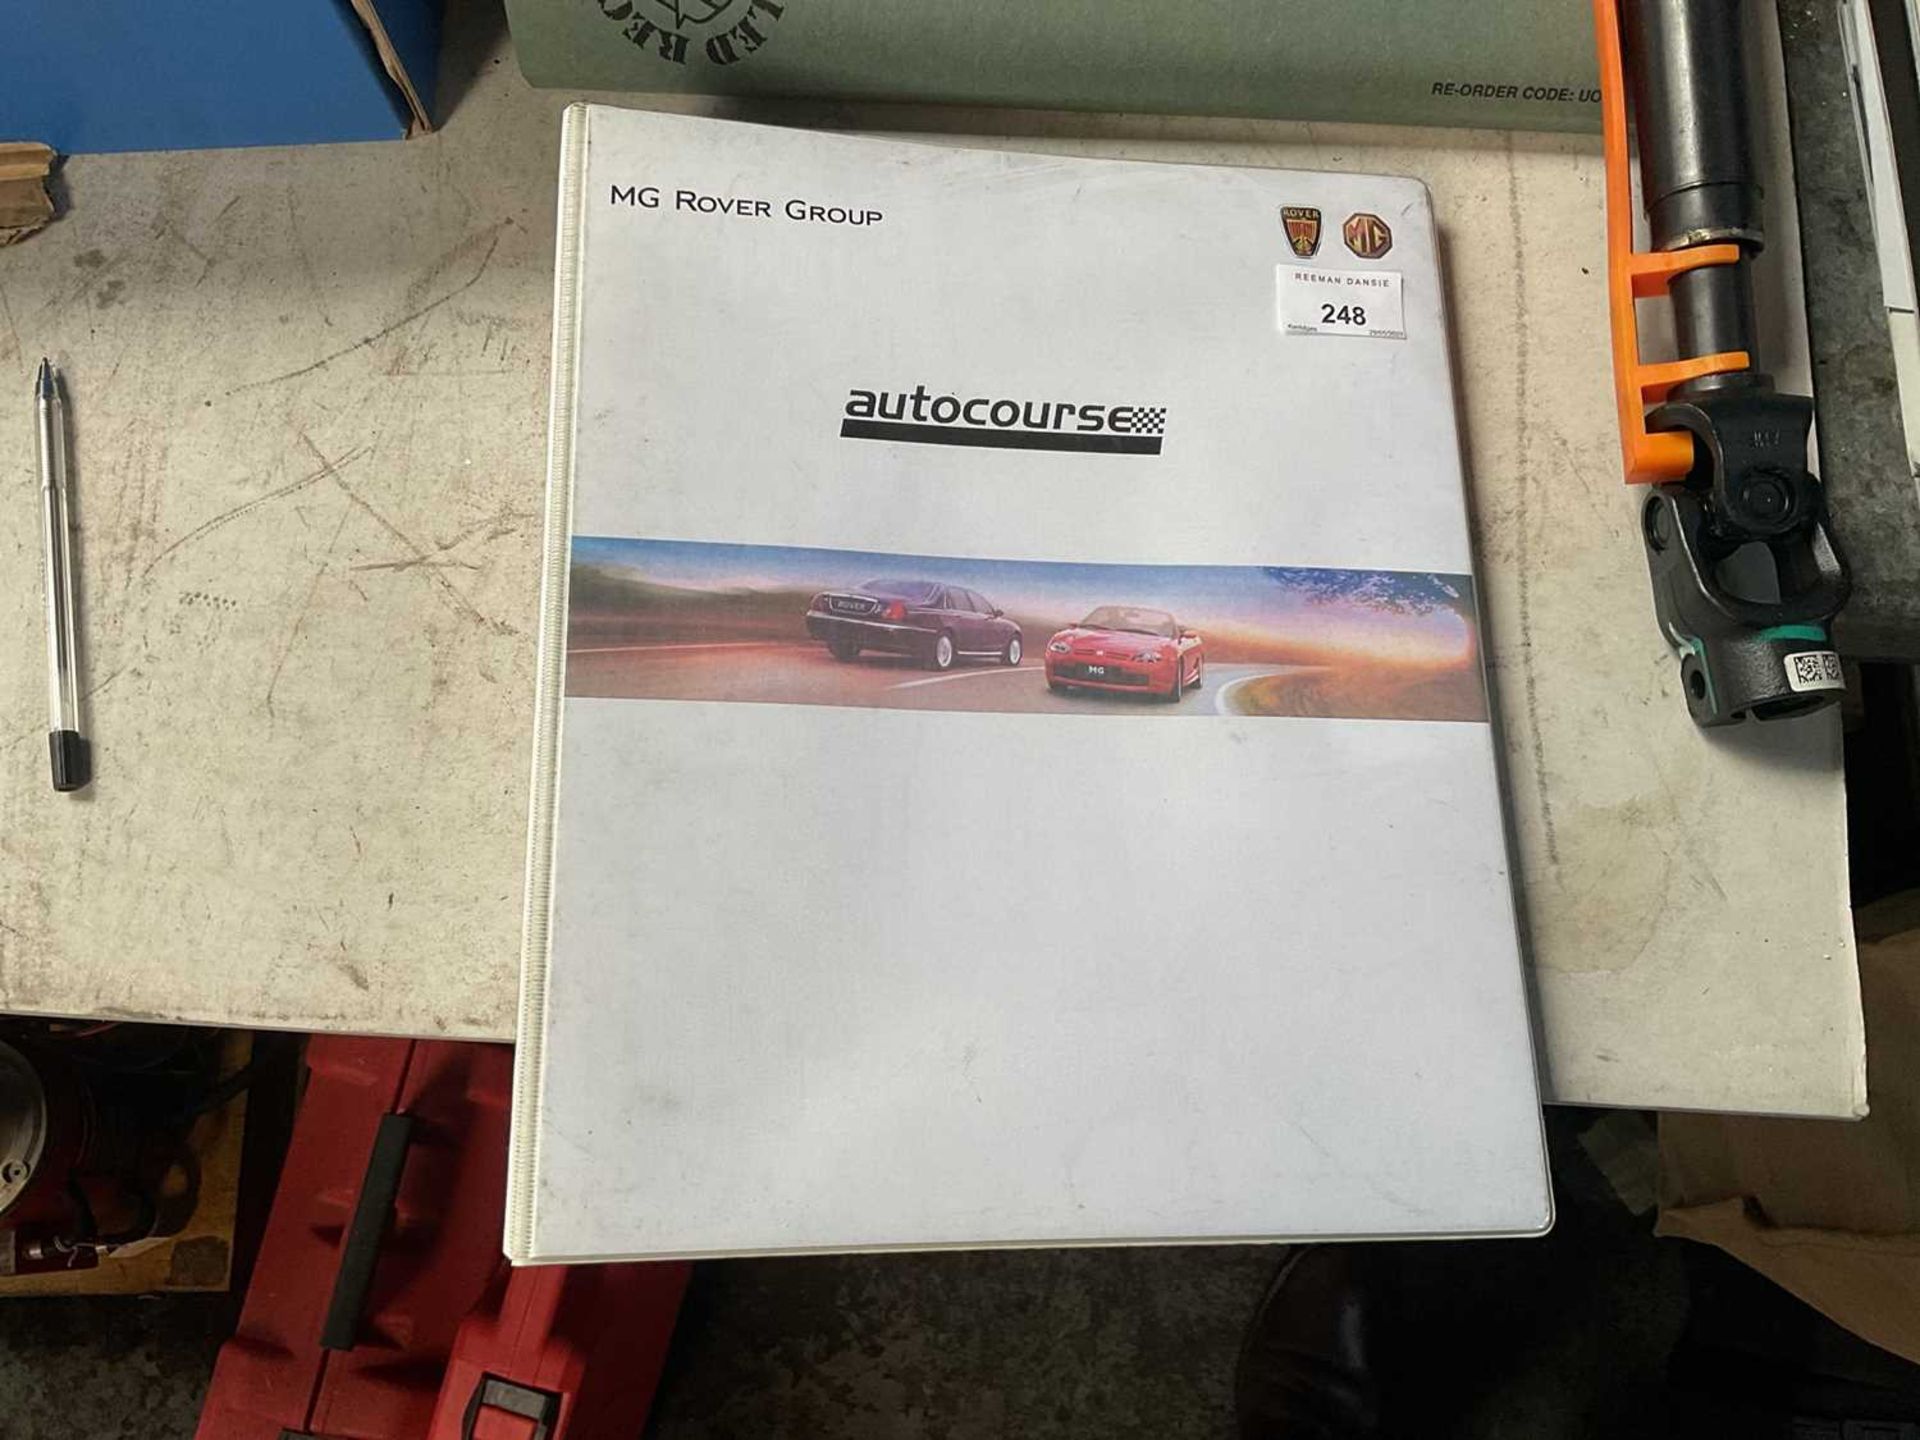 MG Rover Group autocourse technical bulletins in folder